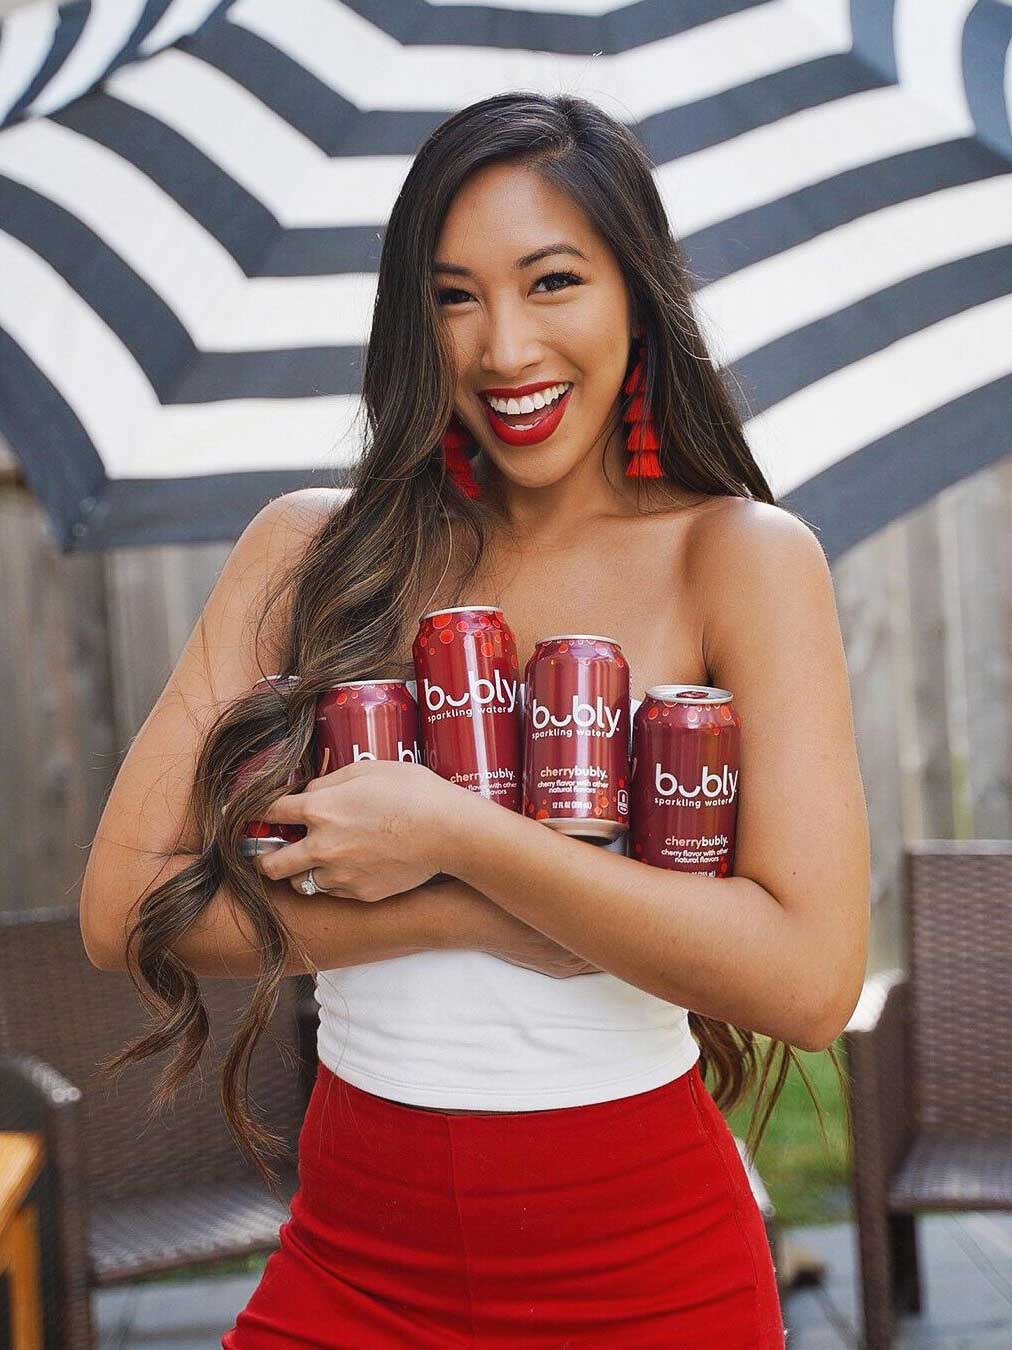 a smiling woman holds multiple cans of bubly in her arms